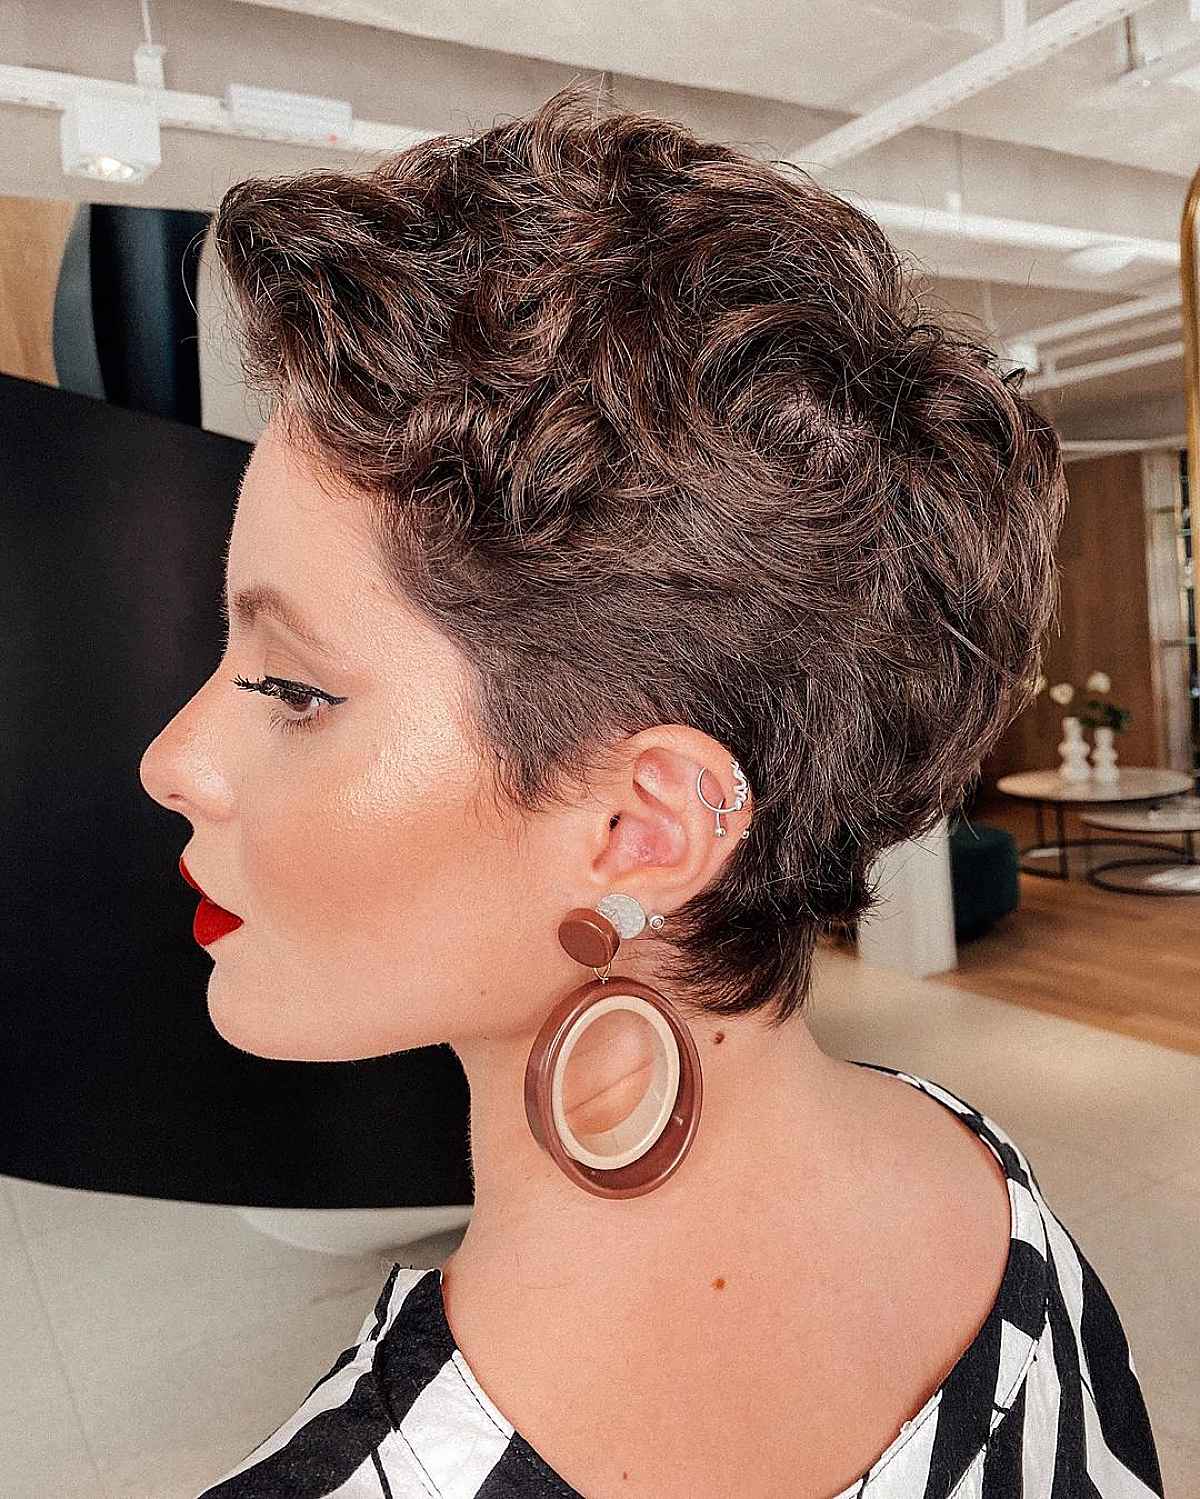 Textured Pixie Cut for Messy, Wavy Hair